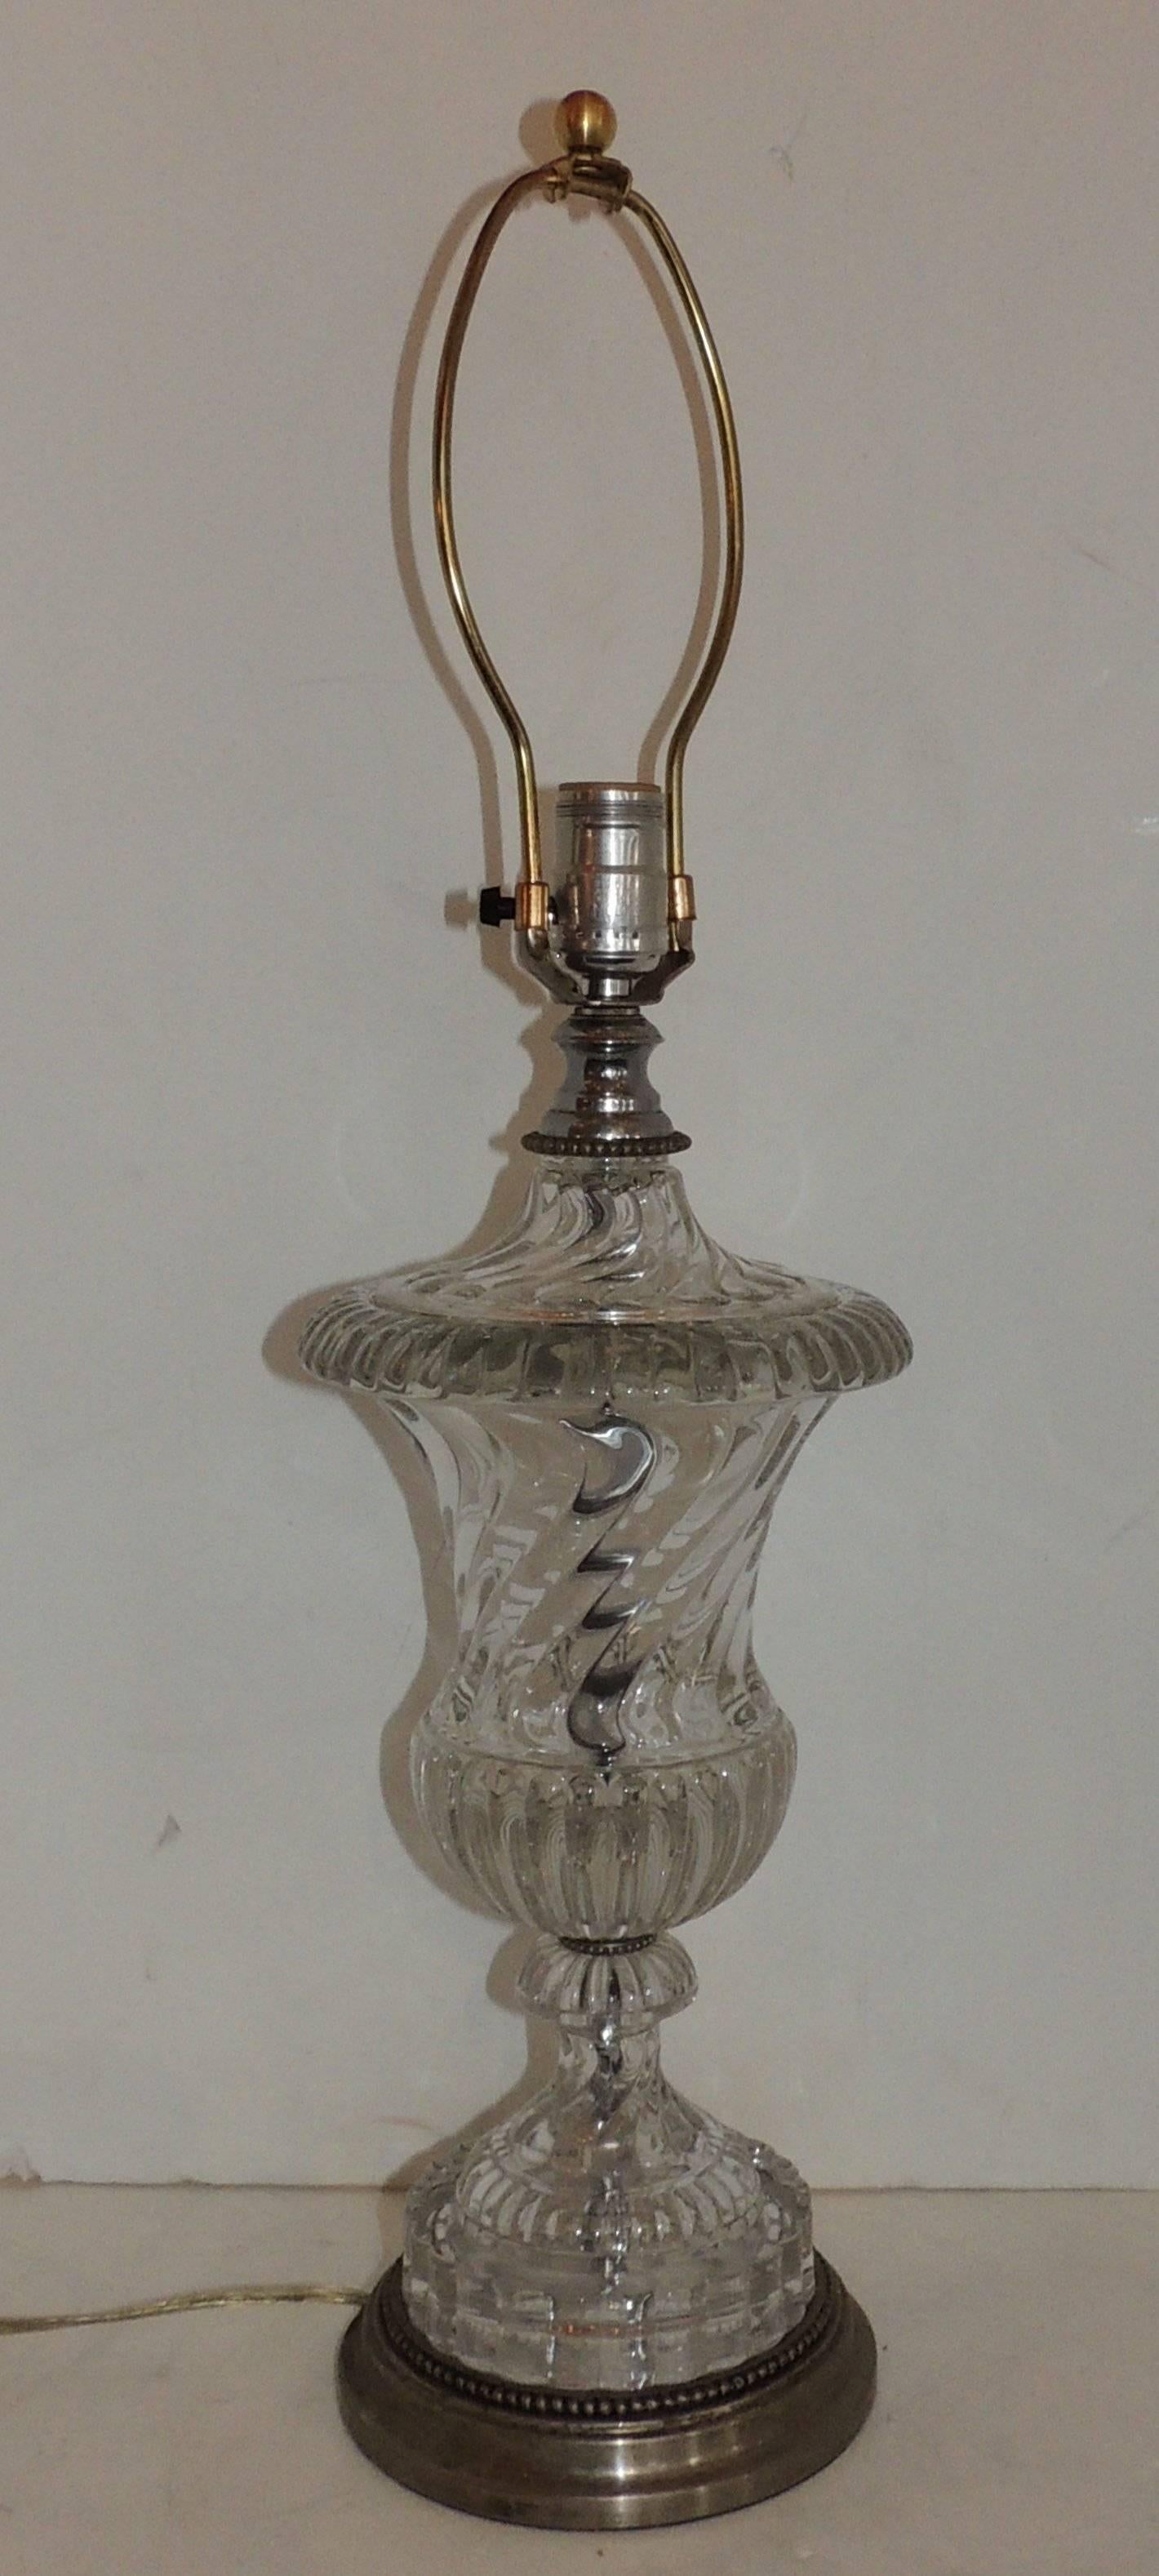 Wonderful pair of silver bronze Baccarat style swirl glass urn form crystal lamps
Measures: 27" H x 8" W

Urn 16" H.